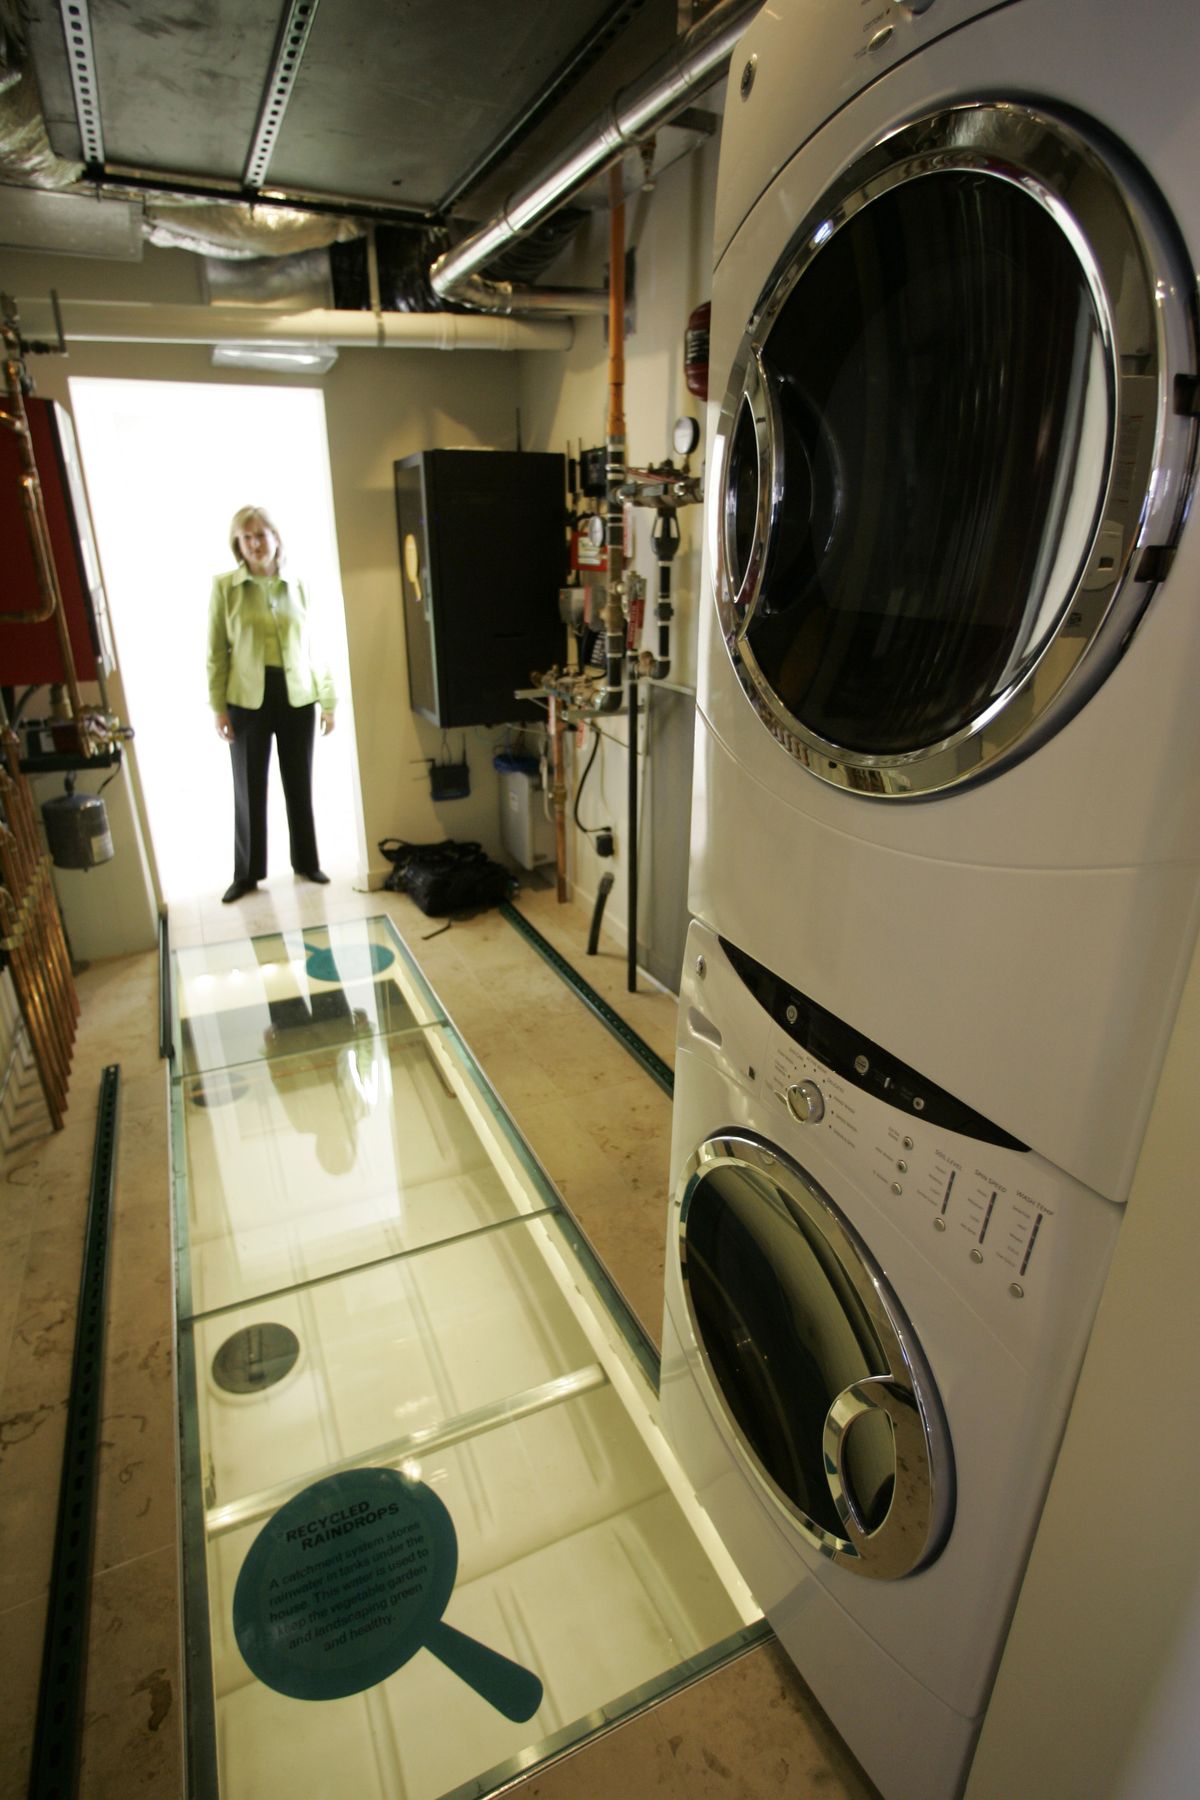 Anne Rashford, SmartHome exhibit project manager, looks in at the laundry room,  where a reservoir under the floor collects rainwater to use in the garden.  (Associated Press / The Spokesman-Review)